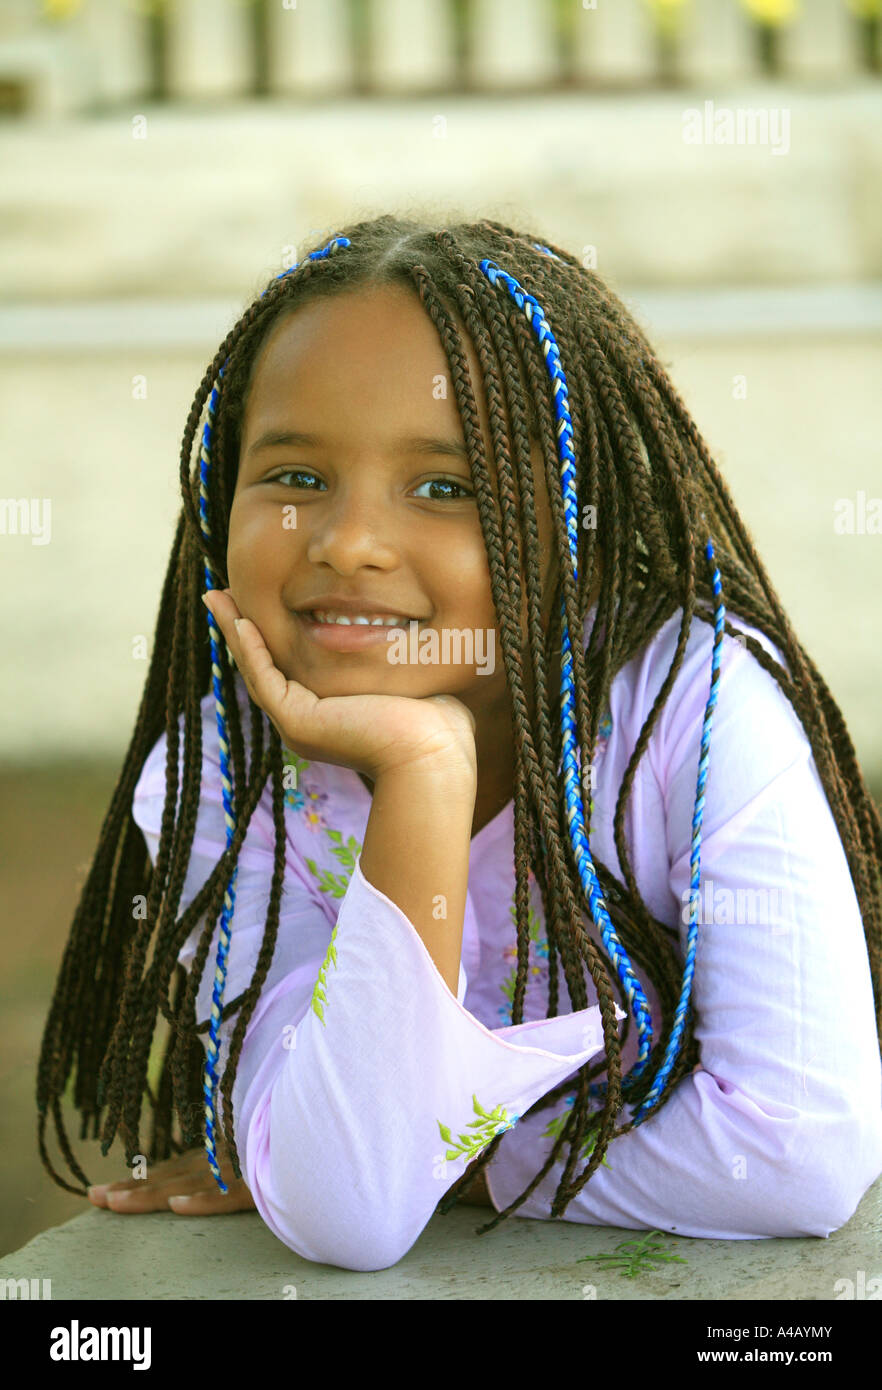 A 6 year old girl of African ancestry with braided hair Stock Photo